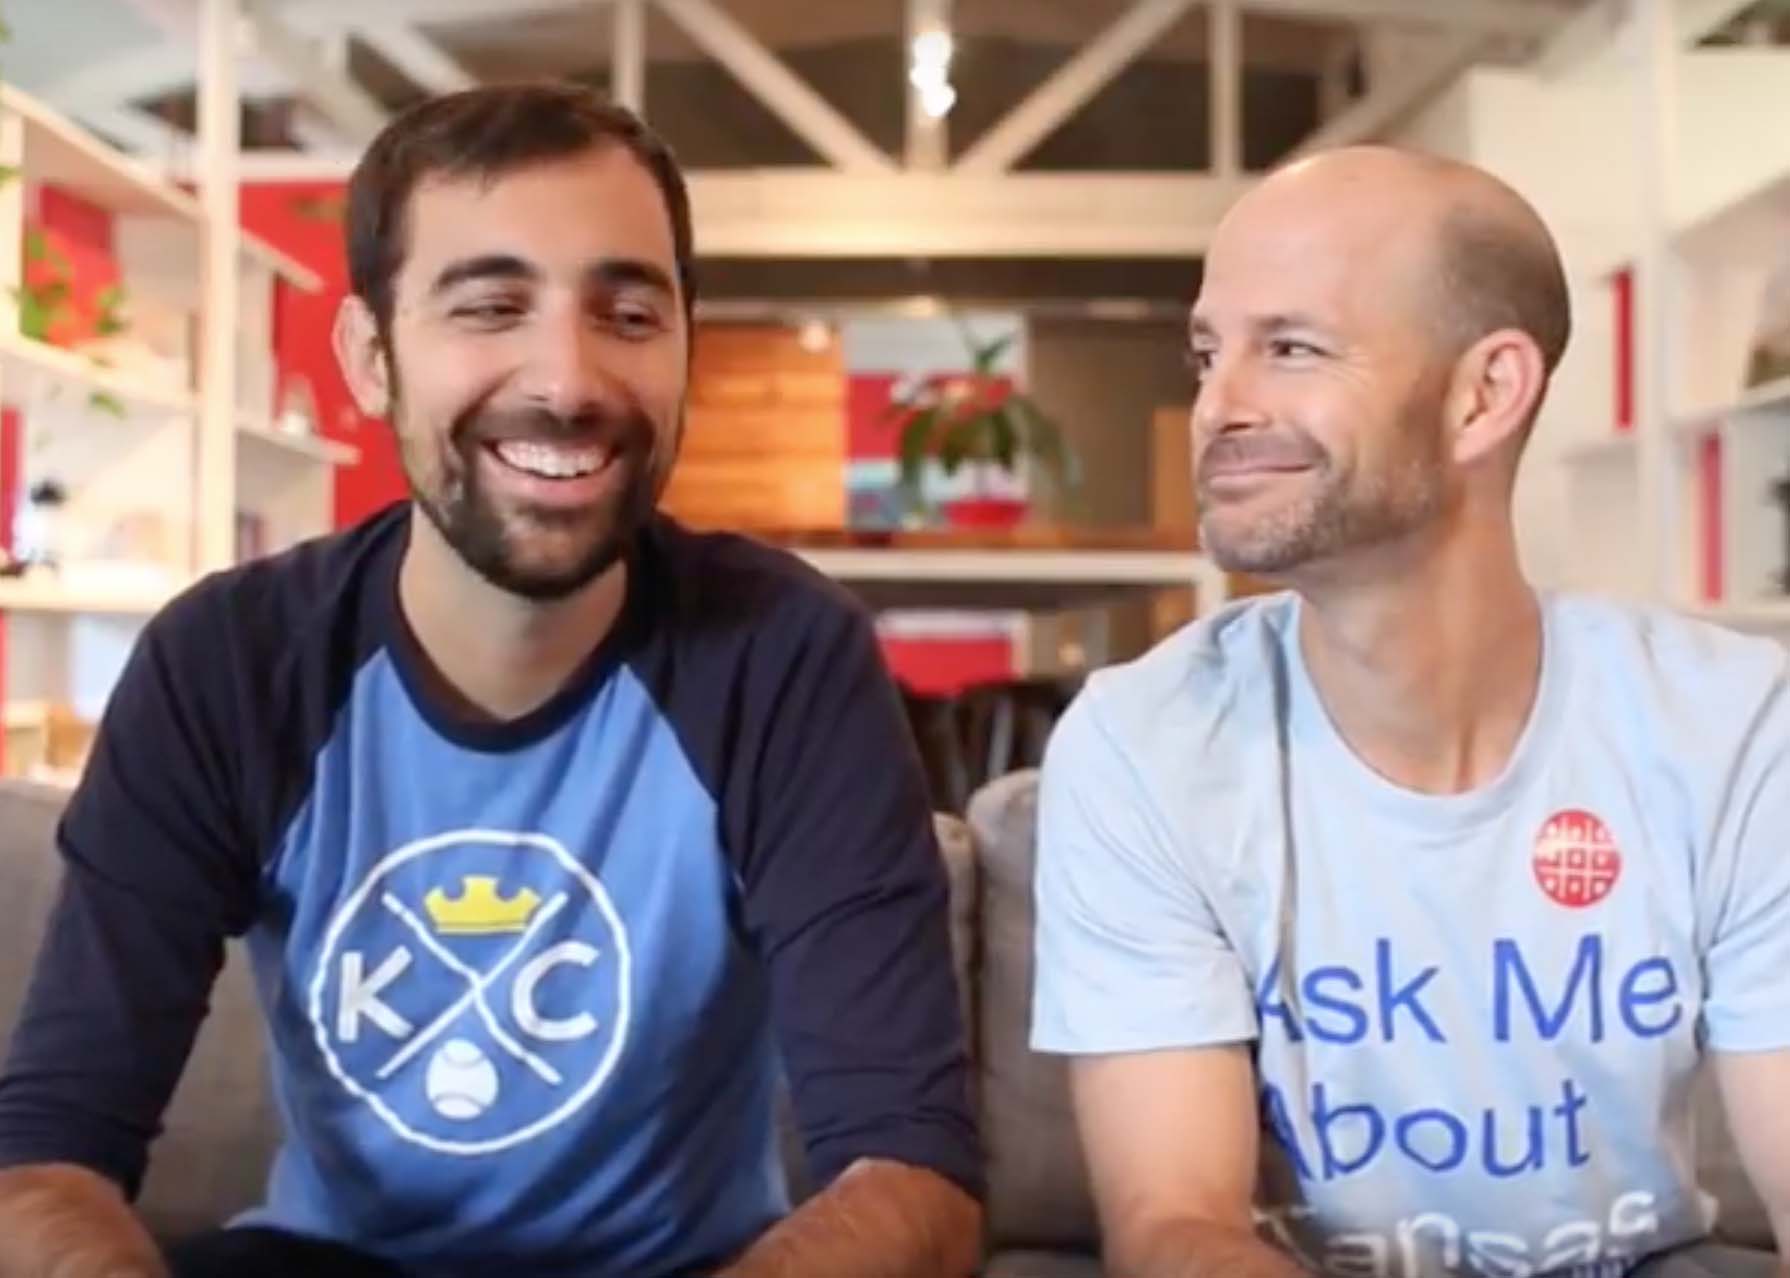 VIDEO: Startup leaders talk KC Startup Foundation (plus bloopers)